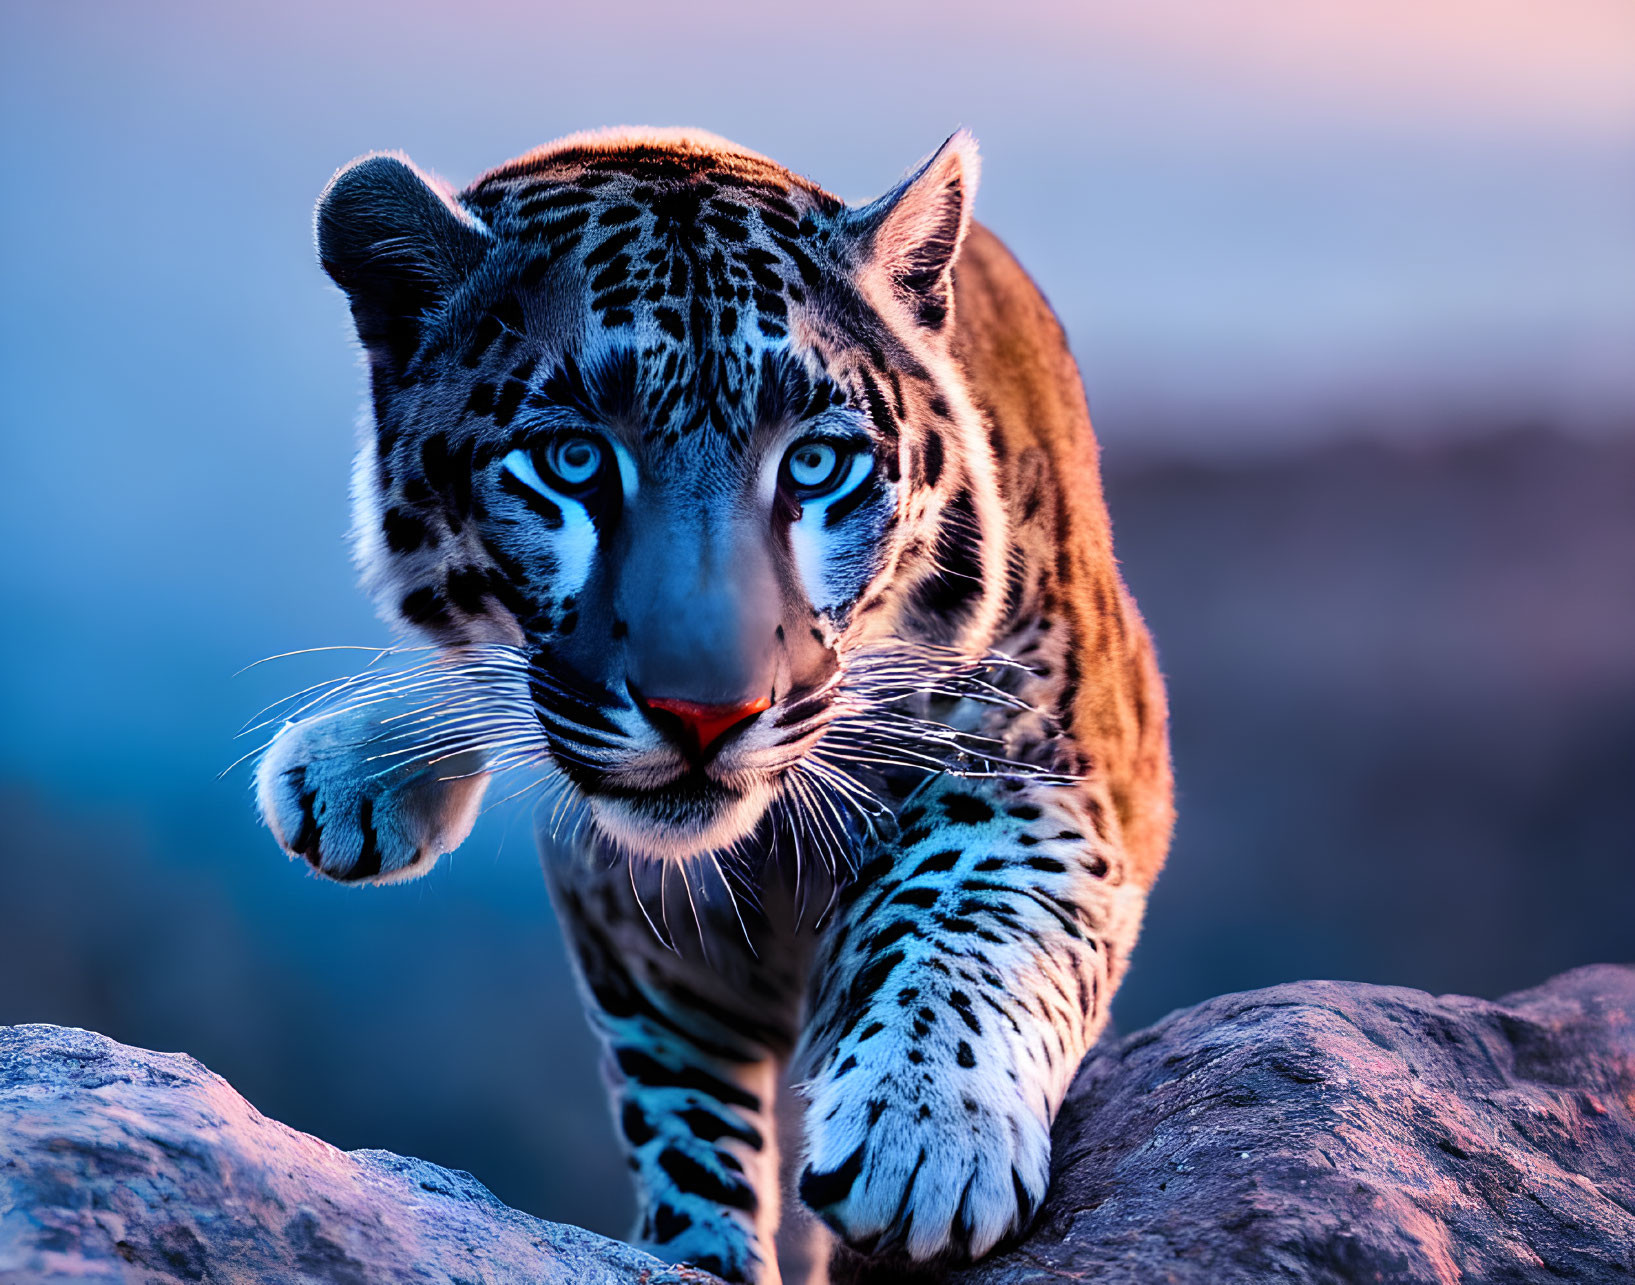 Majestic tiger with blue eyes in vivid dusk backdrop